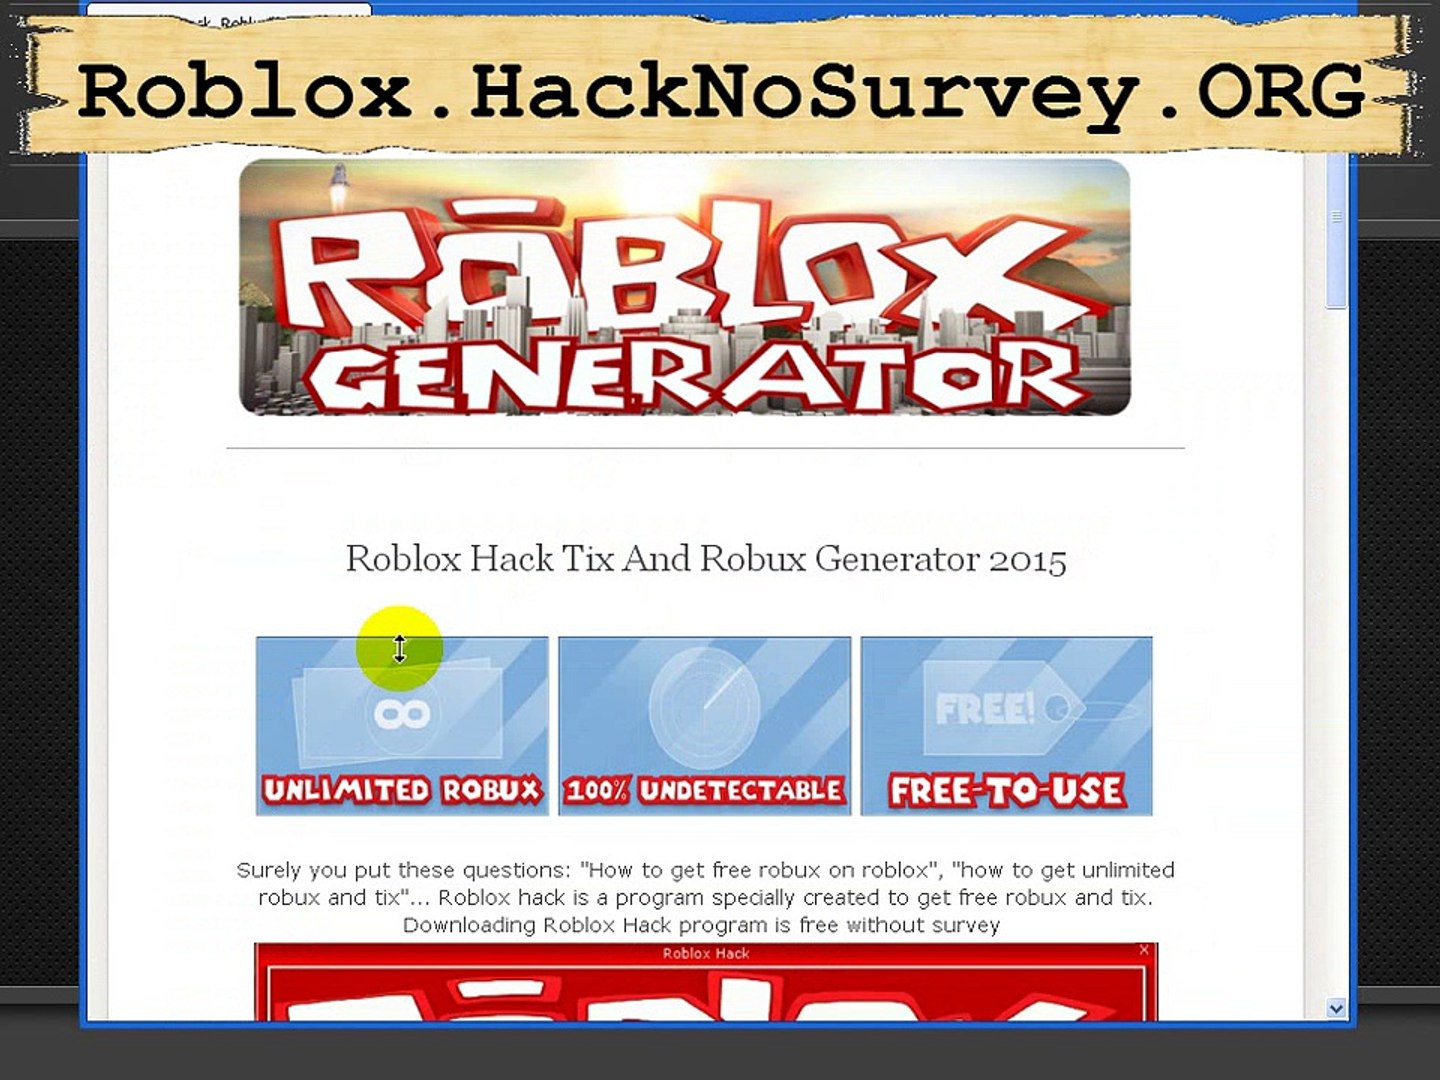 Roblox Hack 2015 How To Get Unlimited Robux And Tix 2015 - unlimited robux hack no survey